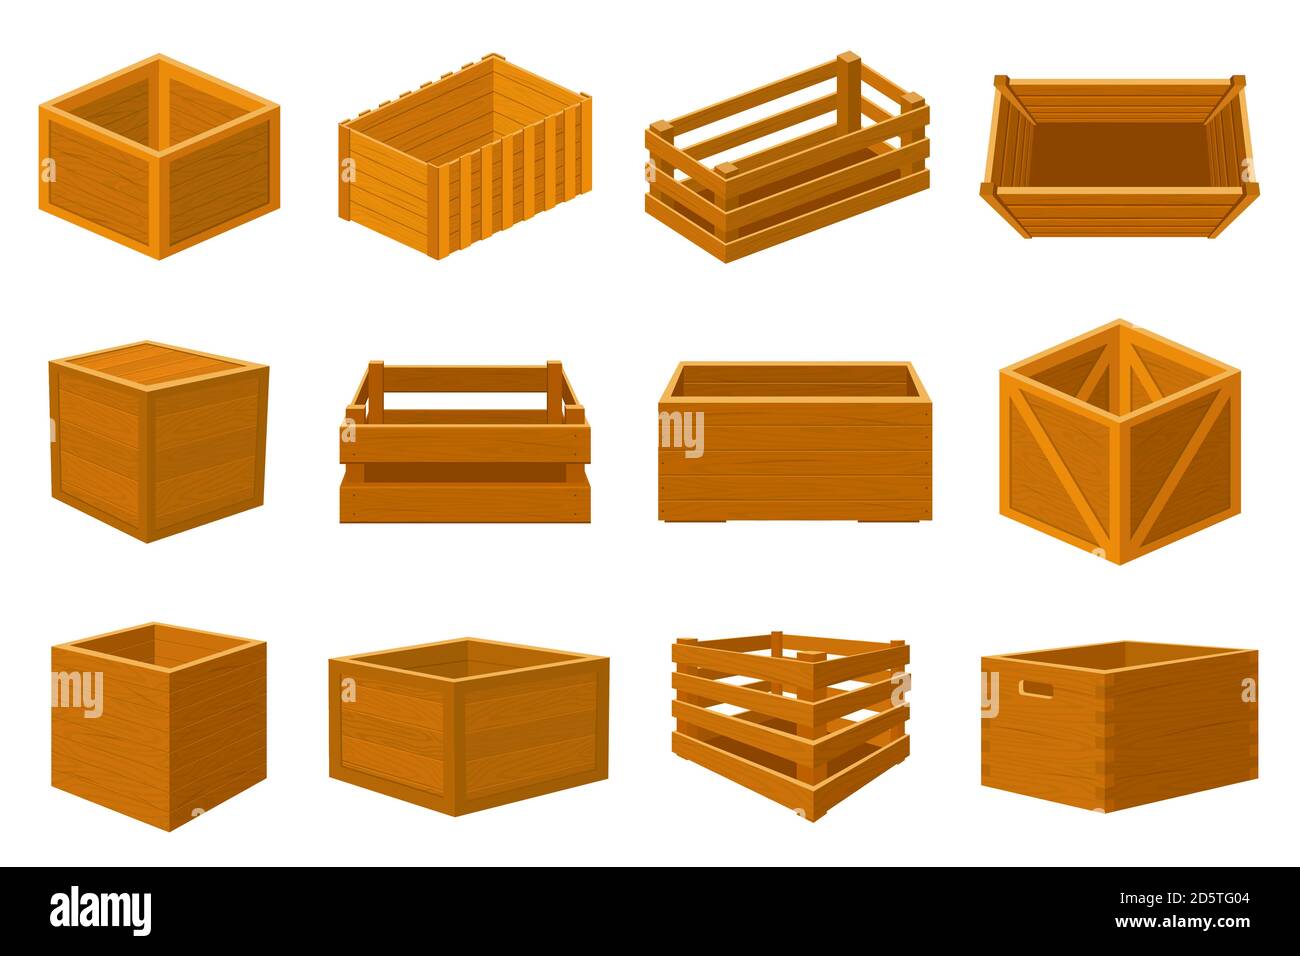 Wooden boxes. Delivery containers, empty wood boxes and parcels, packed shipping crates isolated vector illustration set Stock Vector